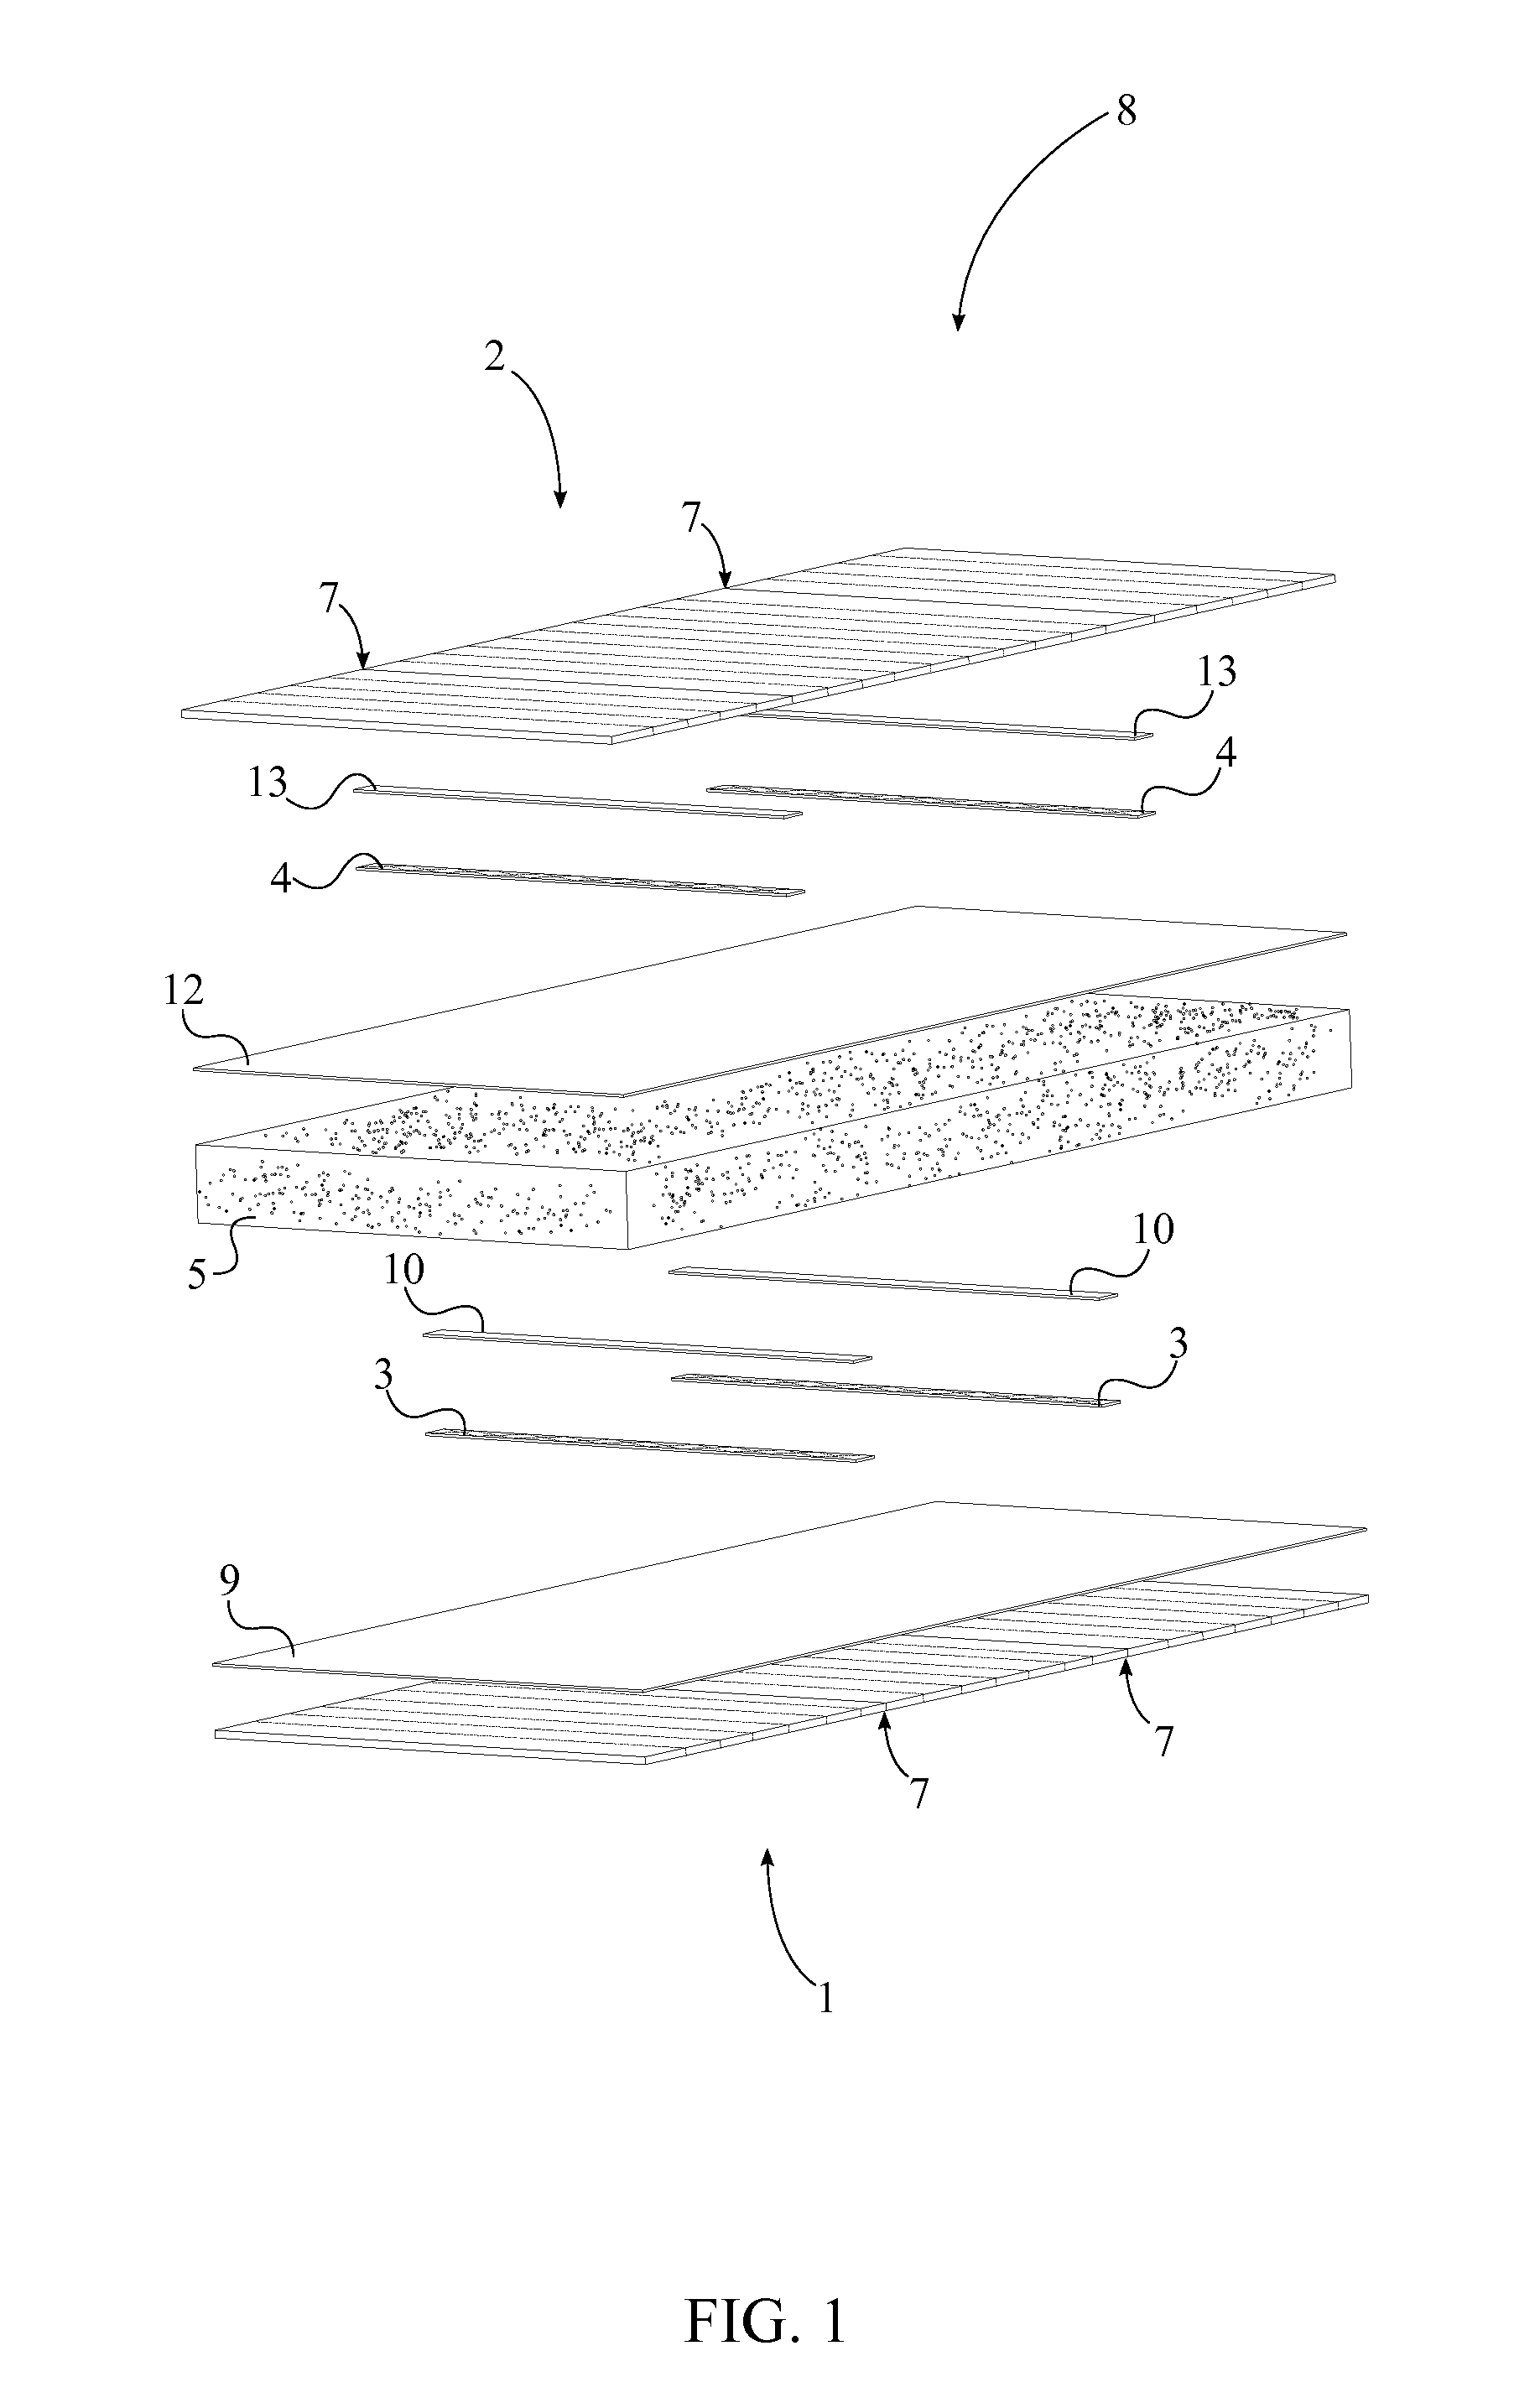 Method for Splicing Stress Skins used for Manufacturing Structural Insulated Panels